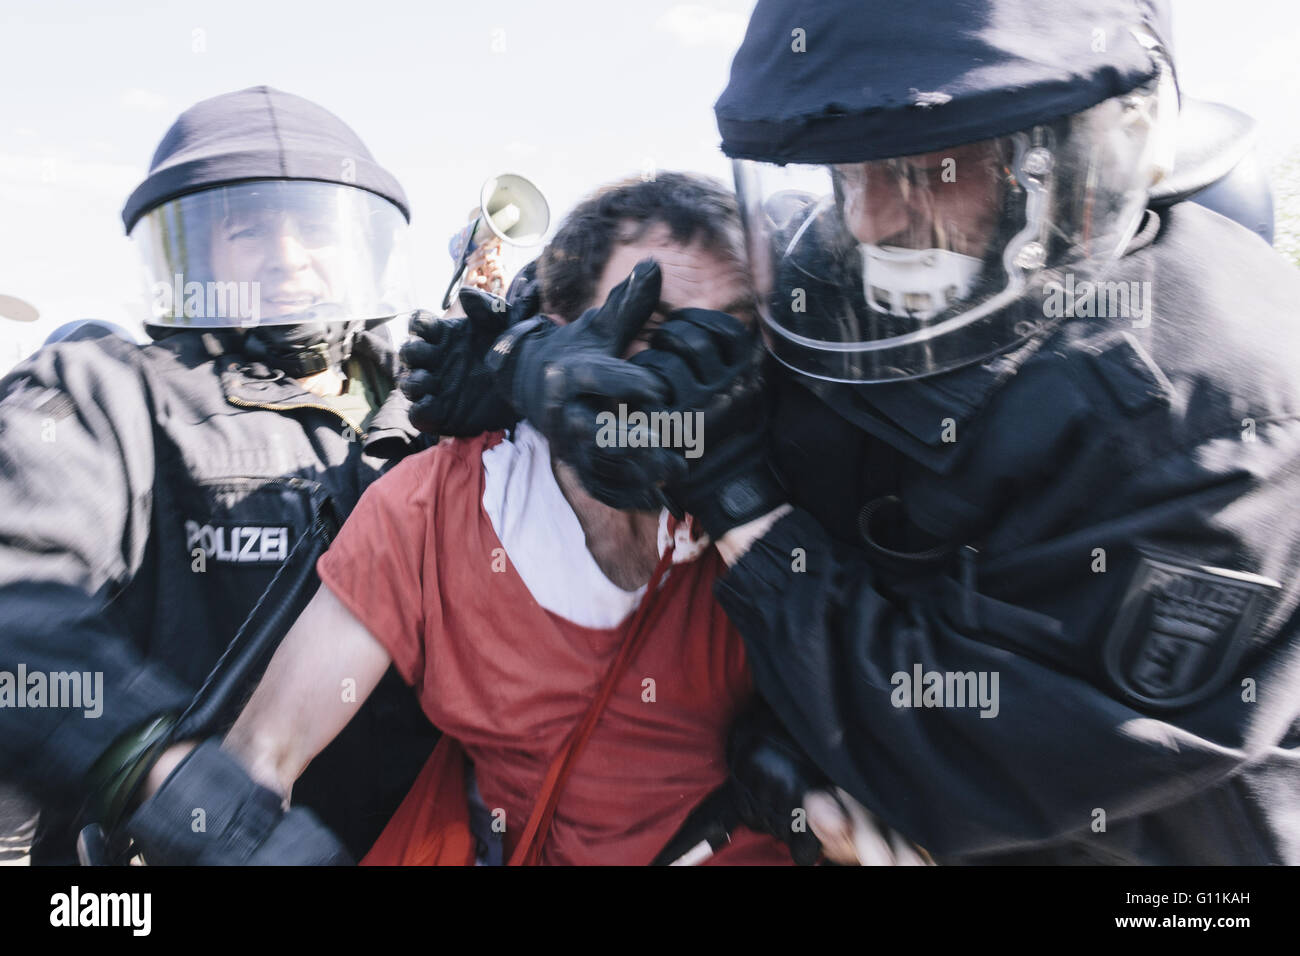 Berlin, Germany. 7th May, 2016. An activist is arrested by the police during the counter protests against rally held under the motto 'Merkel muss weg! 'Merkel must go' organised by far-right group 'We for Berlin & We for Germany' © Jan Scheunert/ZUMA Wire/Alamy Live News Stock Photo